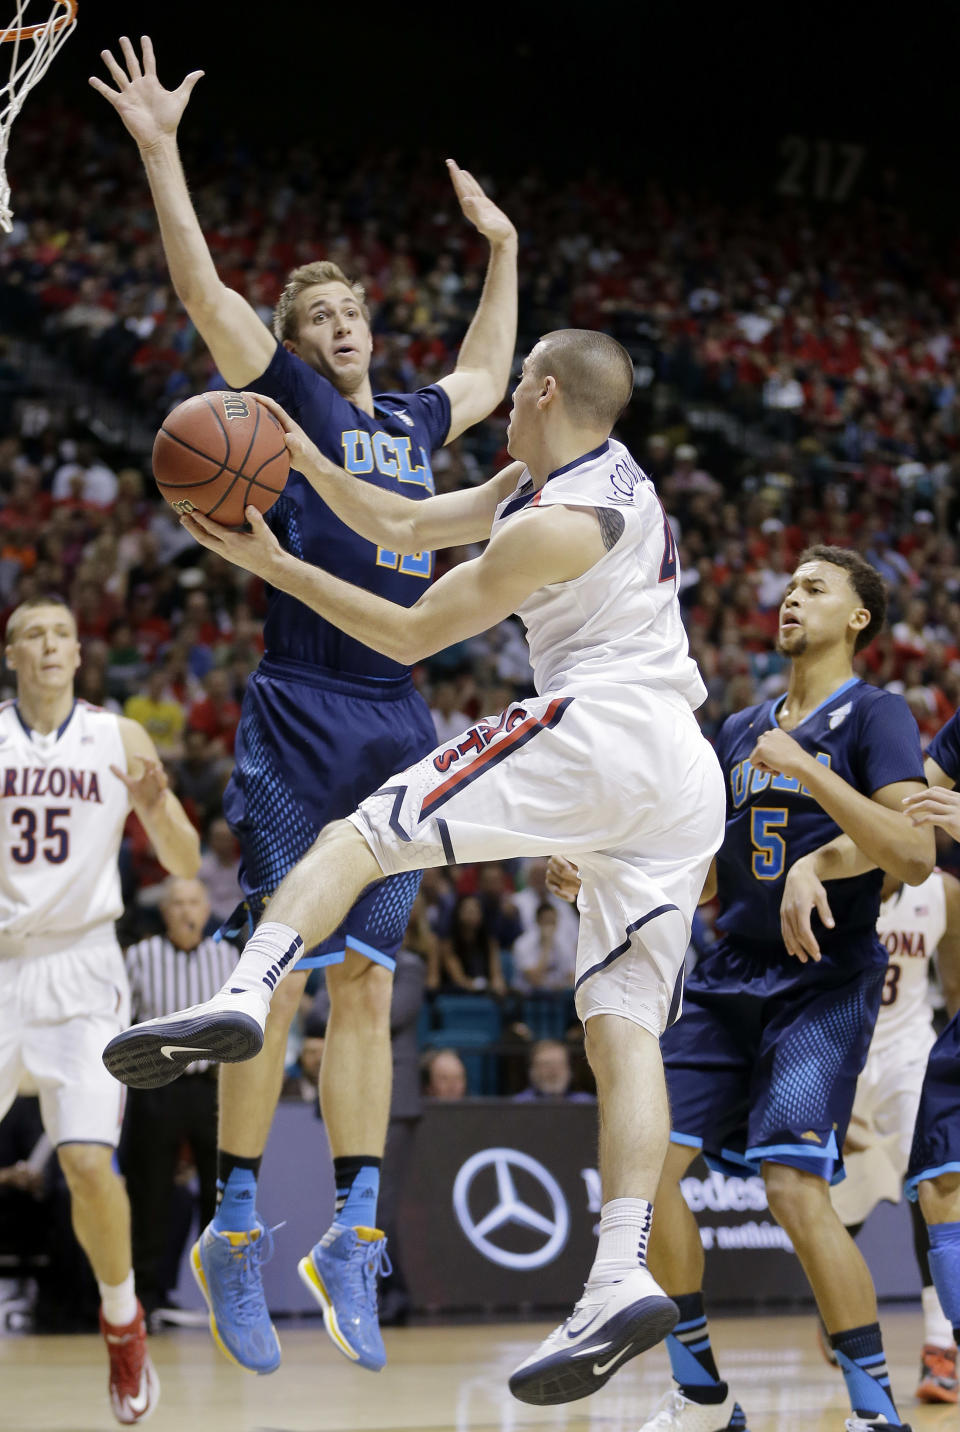 Arizona's T.J. McConnell passes off the ball against UCLA's David Wear in the first half during the championship game of the NCAA Pac-12 conference college basketball tournament, Saturday, March 15, 2014, in Las Vegas. (AP Photo/Julie Jacobson)